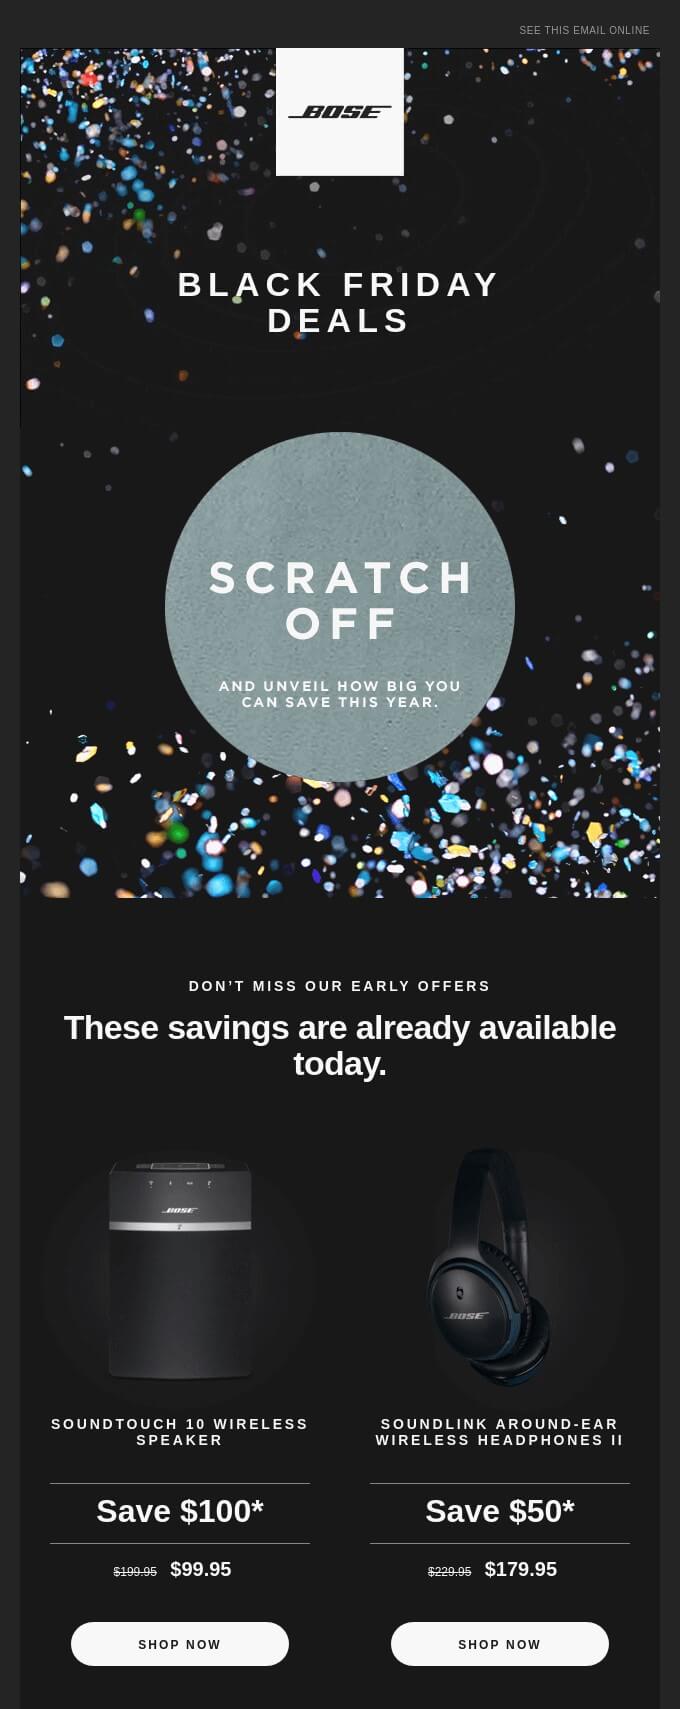 A Black Friday email with a scratch-off sticker that says Scratch off and unveil how big you can save this year.